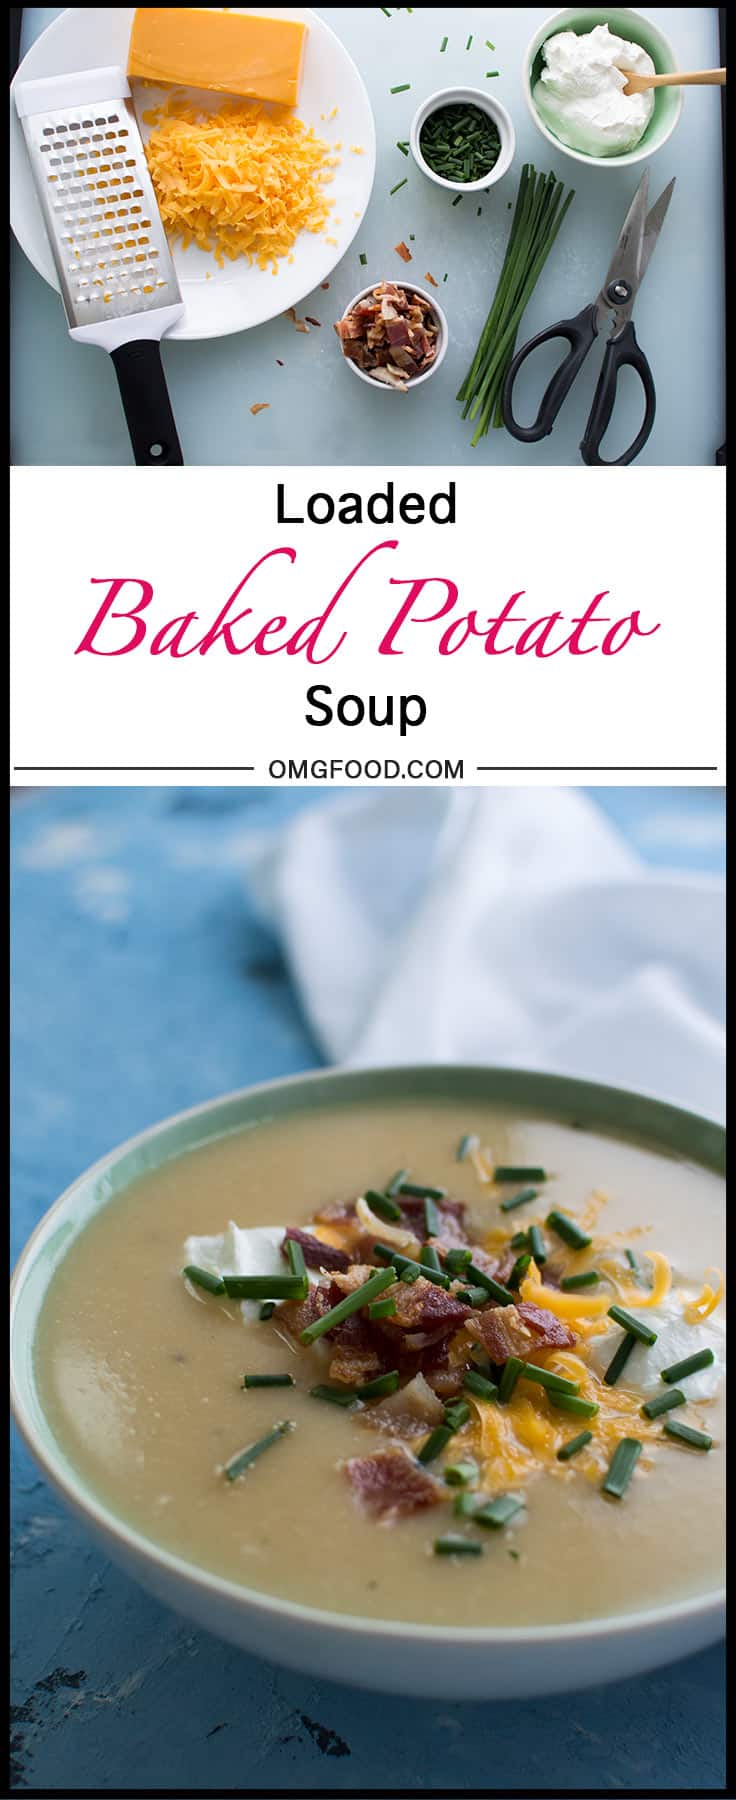 A Pinterest banner of loaded baked potato and cauliflower soup.